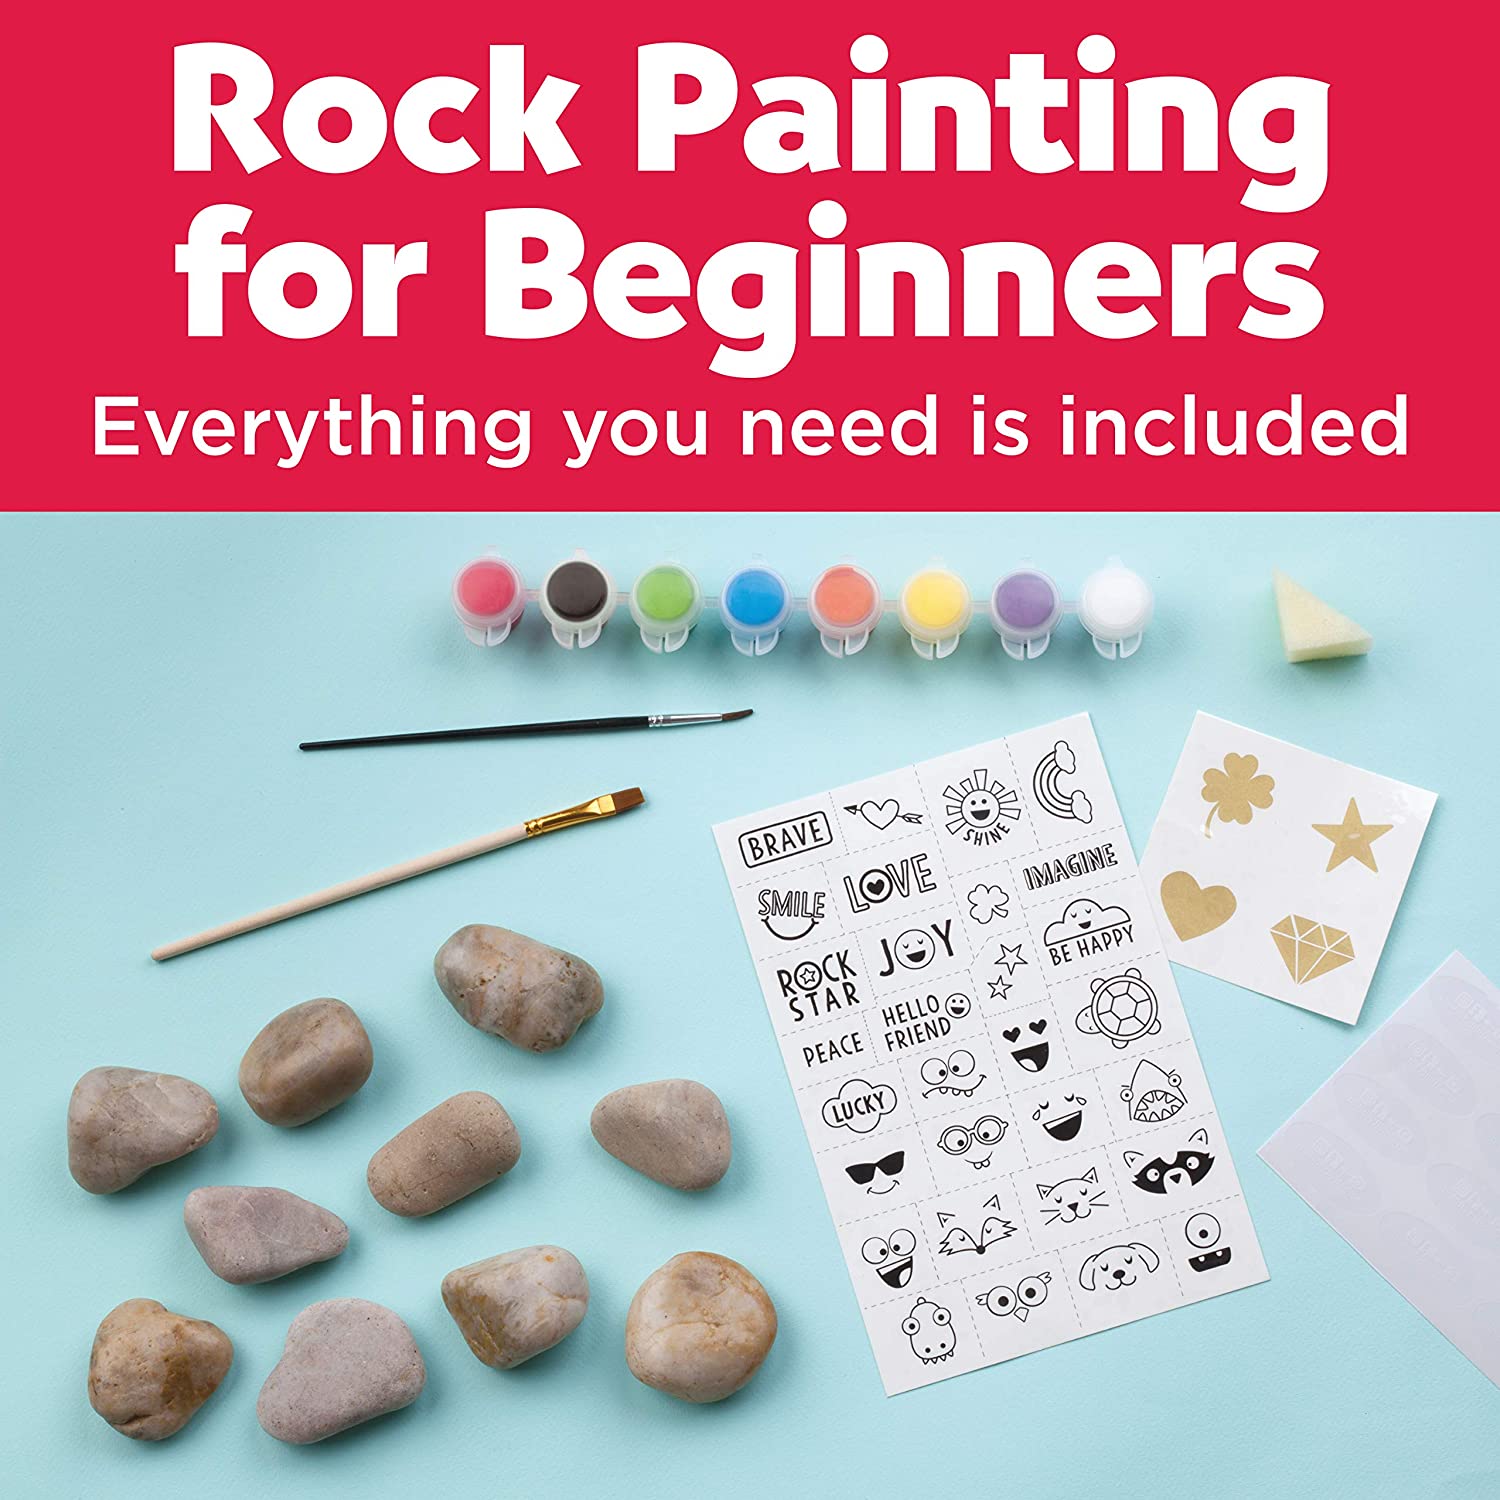 YIFUHH Creative Rock Painting Kit for Kids, Arts and Crafts for Boys&Girls Age 6-12Acrylic Paint, Waterproof Markers, gems-Kids Paintin